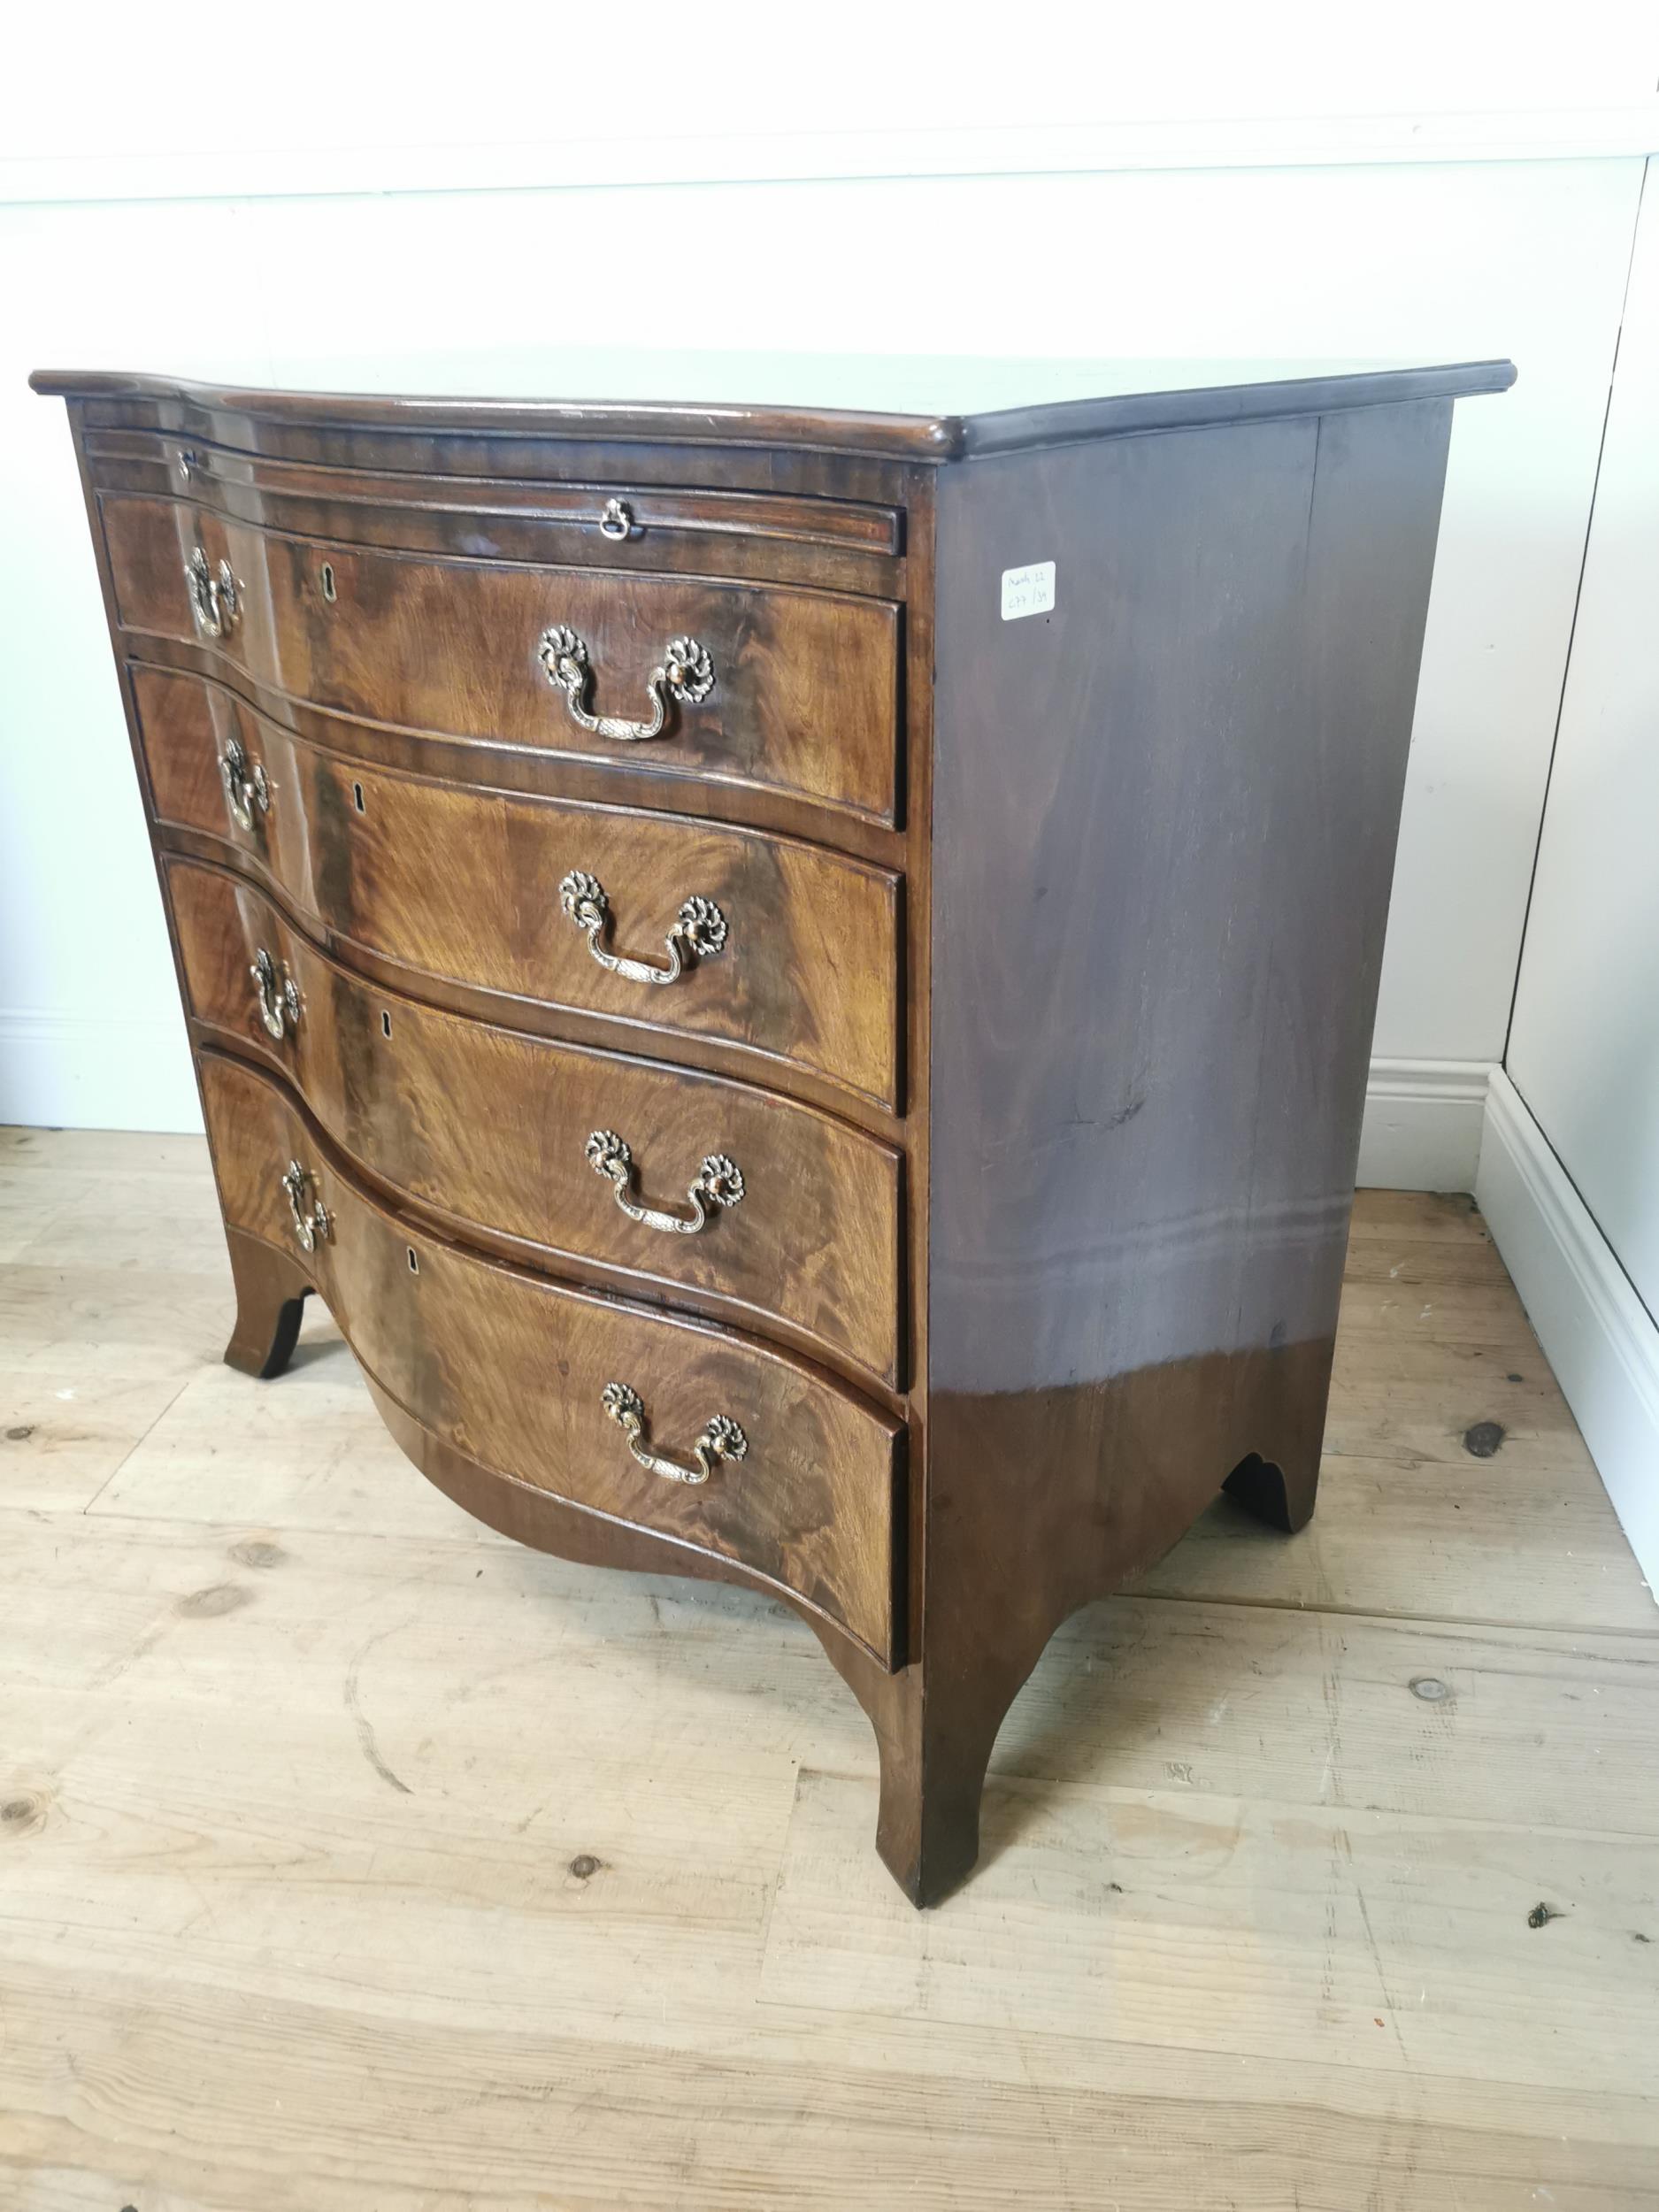 Good quality Edwardian serpentine fronted chest of drawers with four graduated drawers with brushing - Image 3 of 6